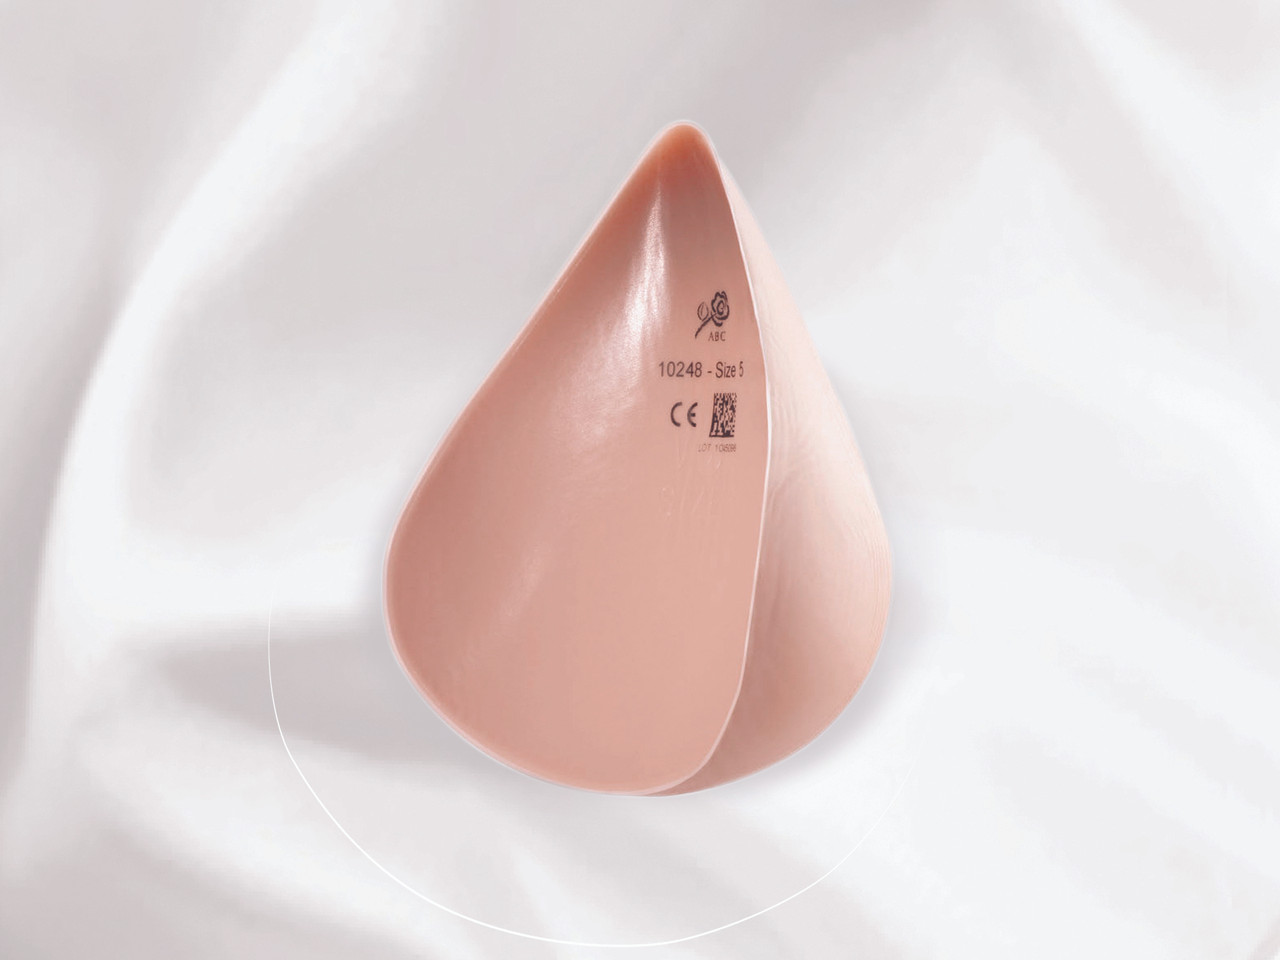 Super Soft Triangle Breast Form by American Breast Care - Survivor Room